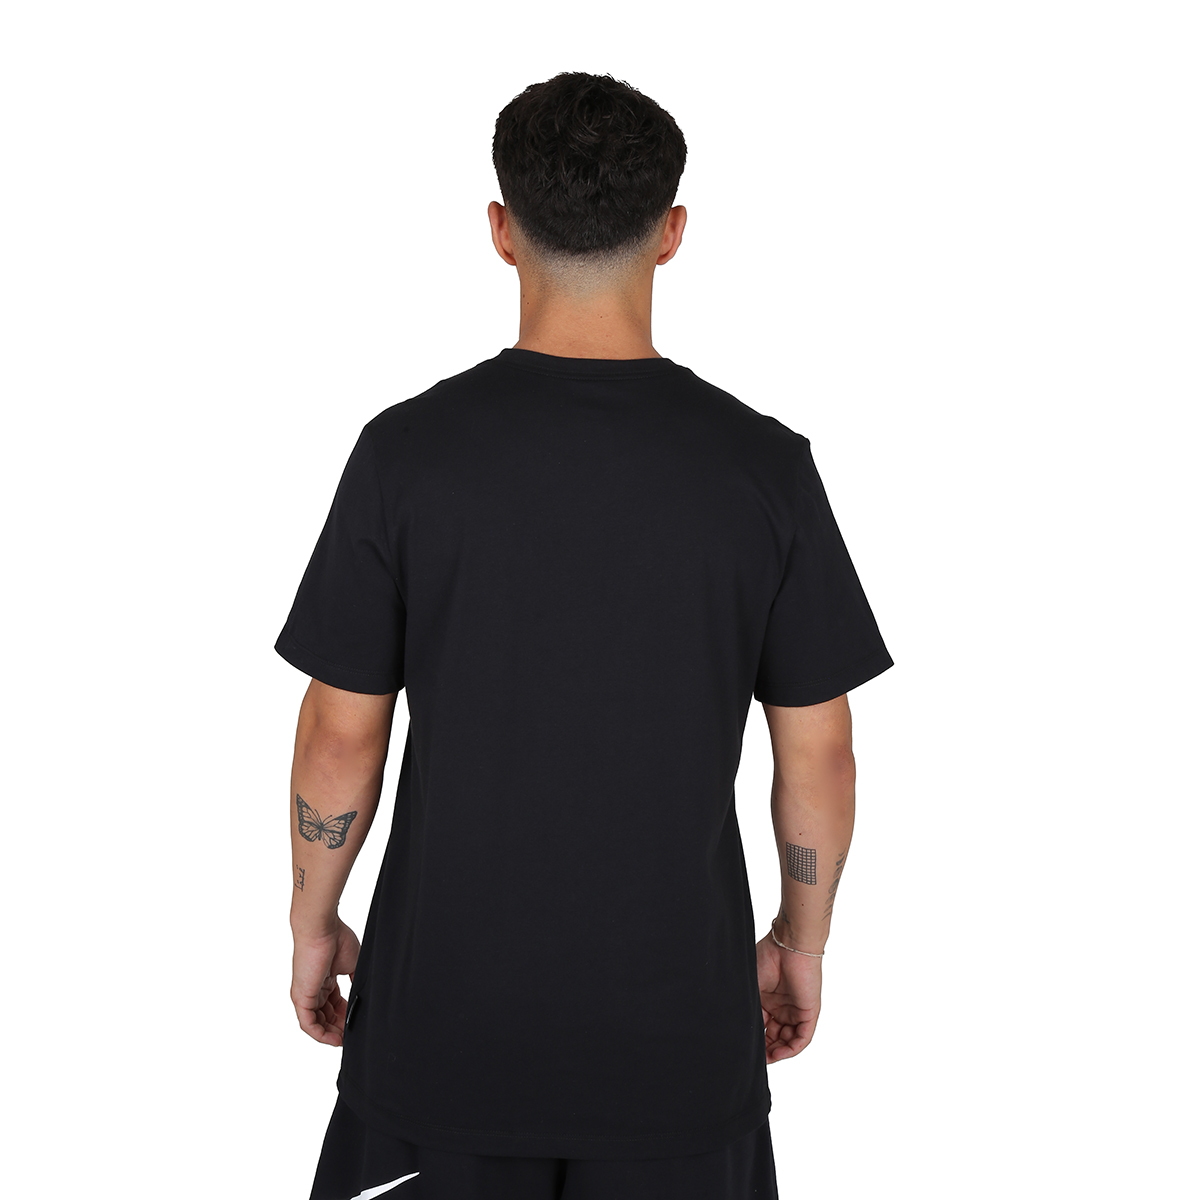 Remera Nike Big Swoosh Lbr Hombre,  image number null